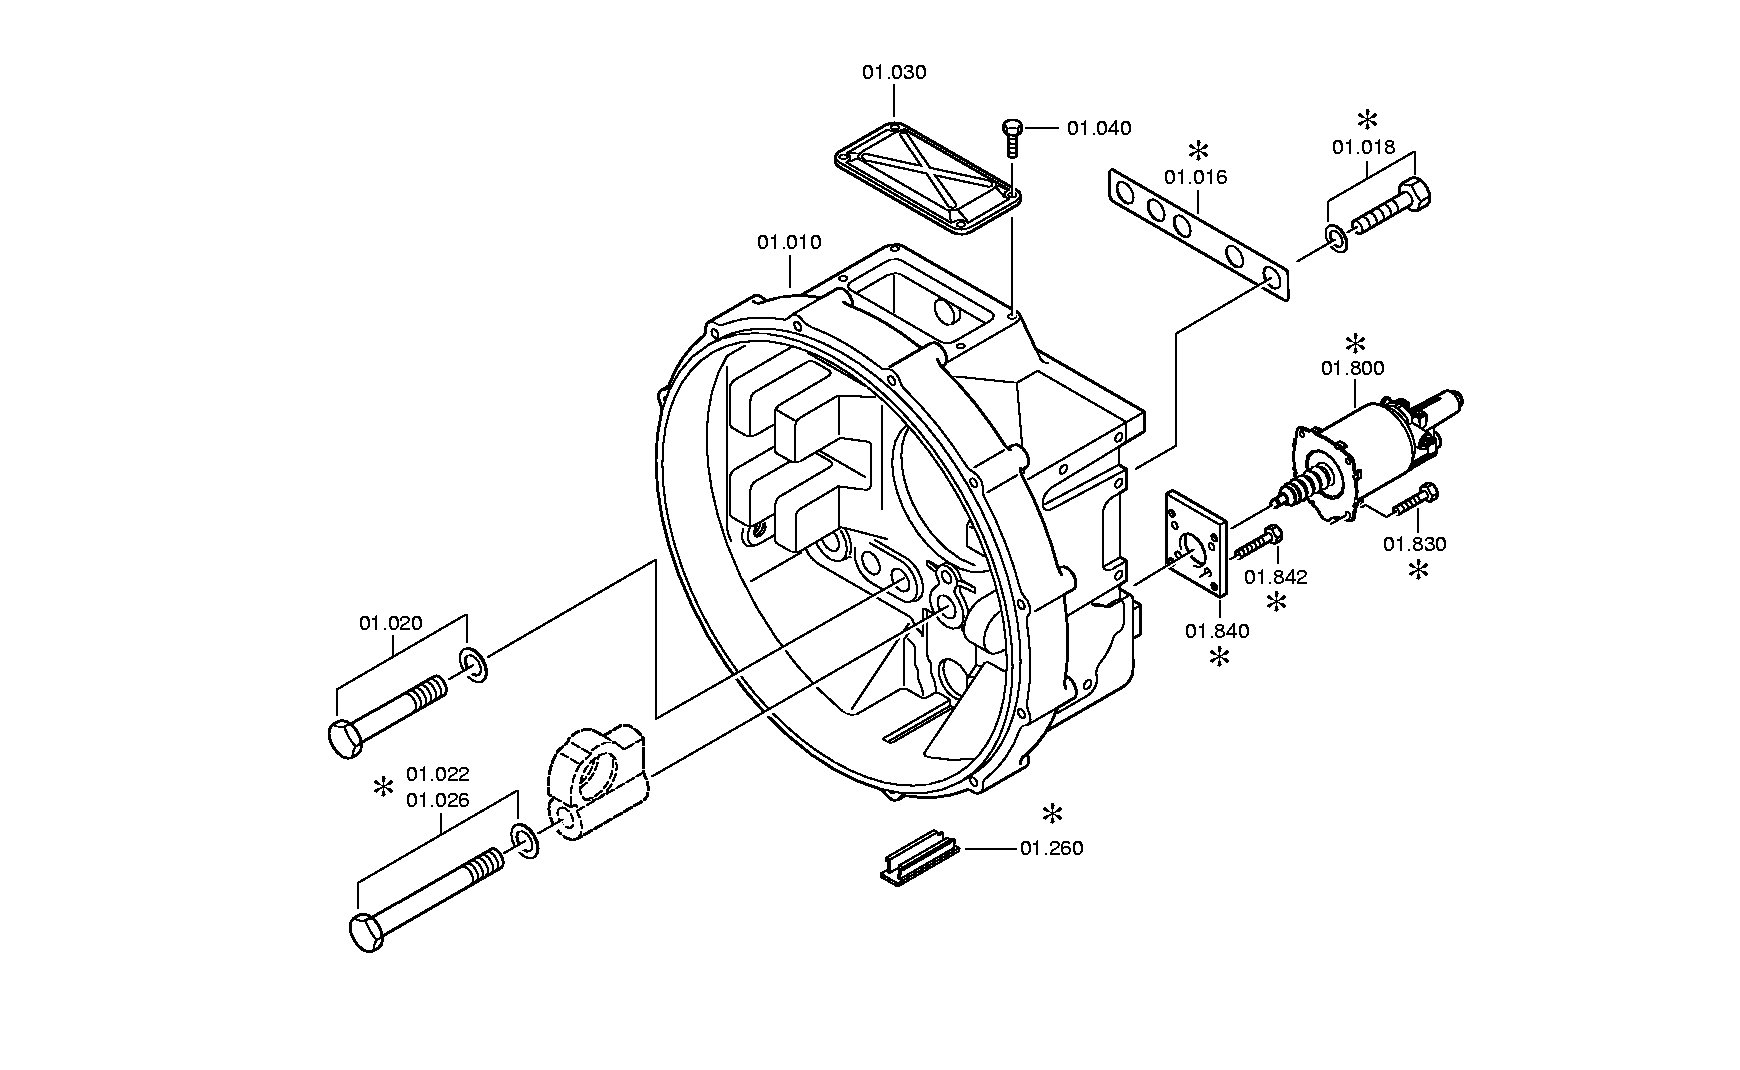 drawing for NISSAN MOTOR CO. 501006795 - CLUTCH CYLINDER (figure 5)